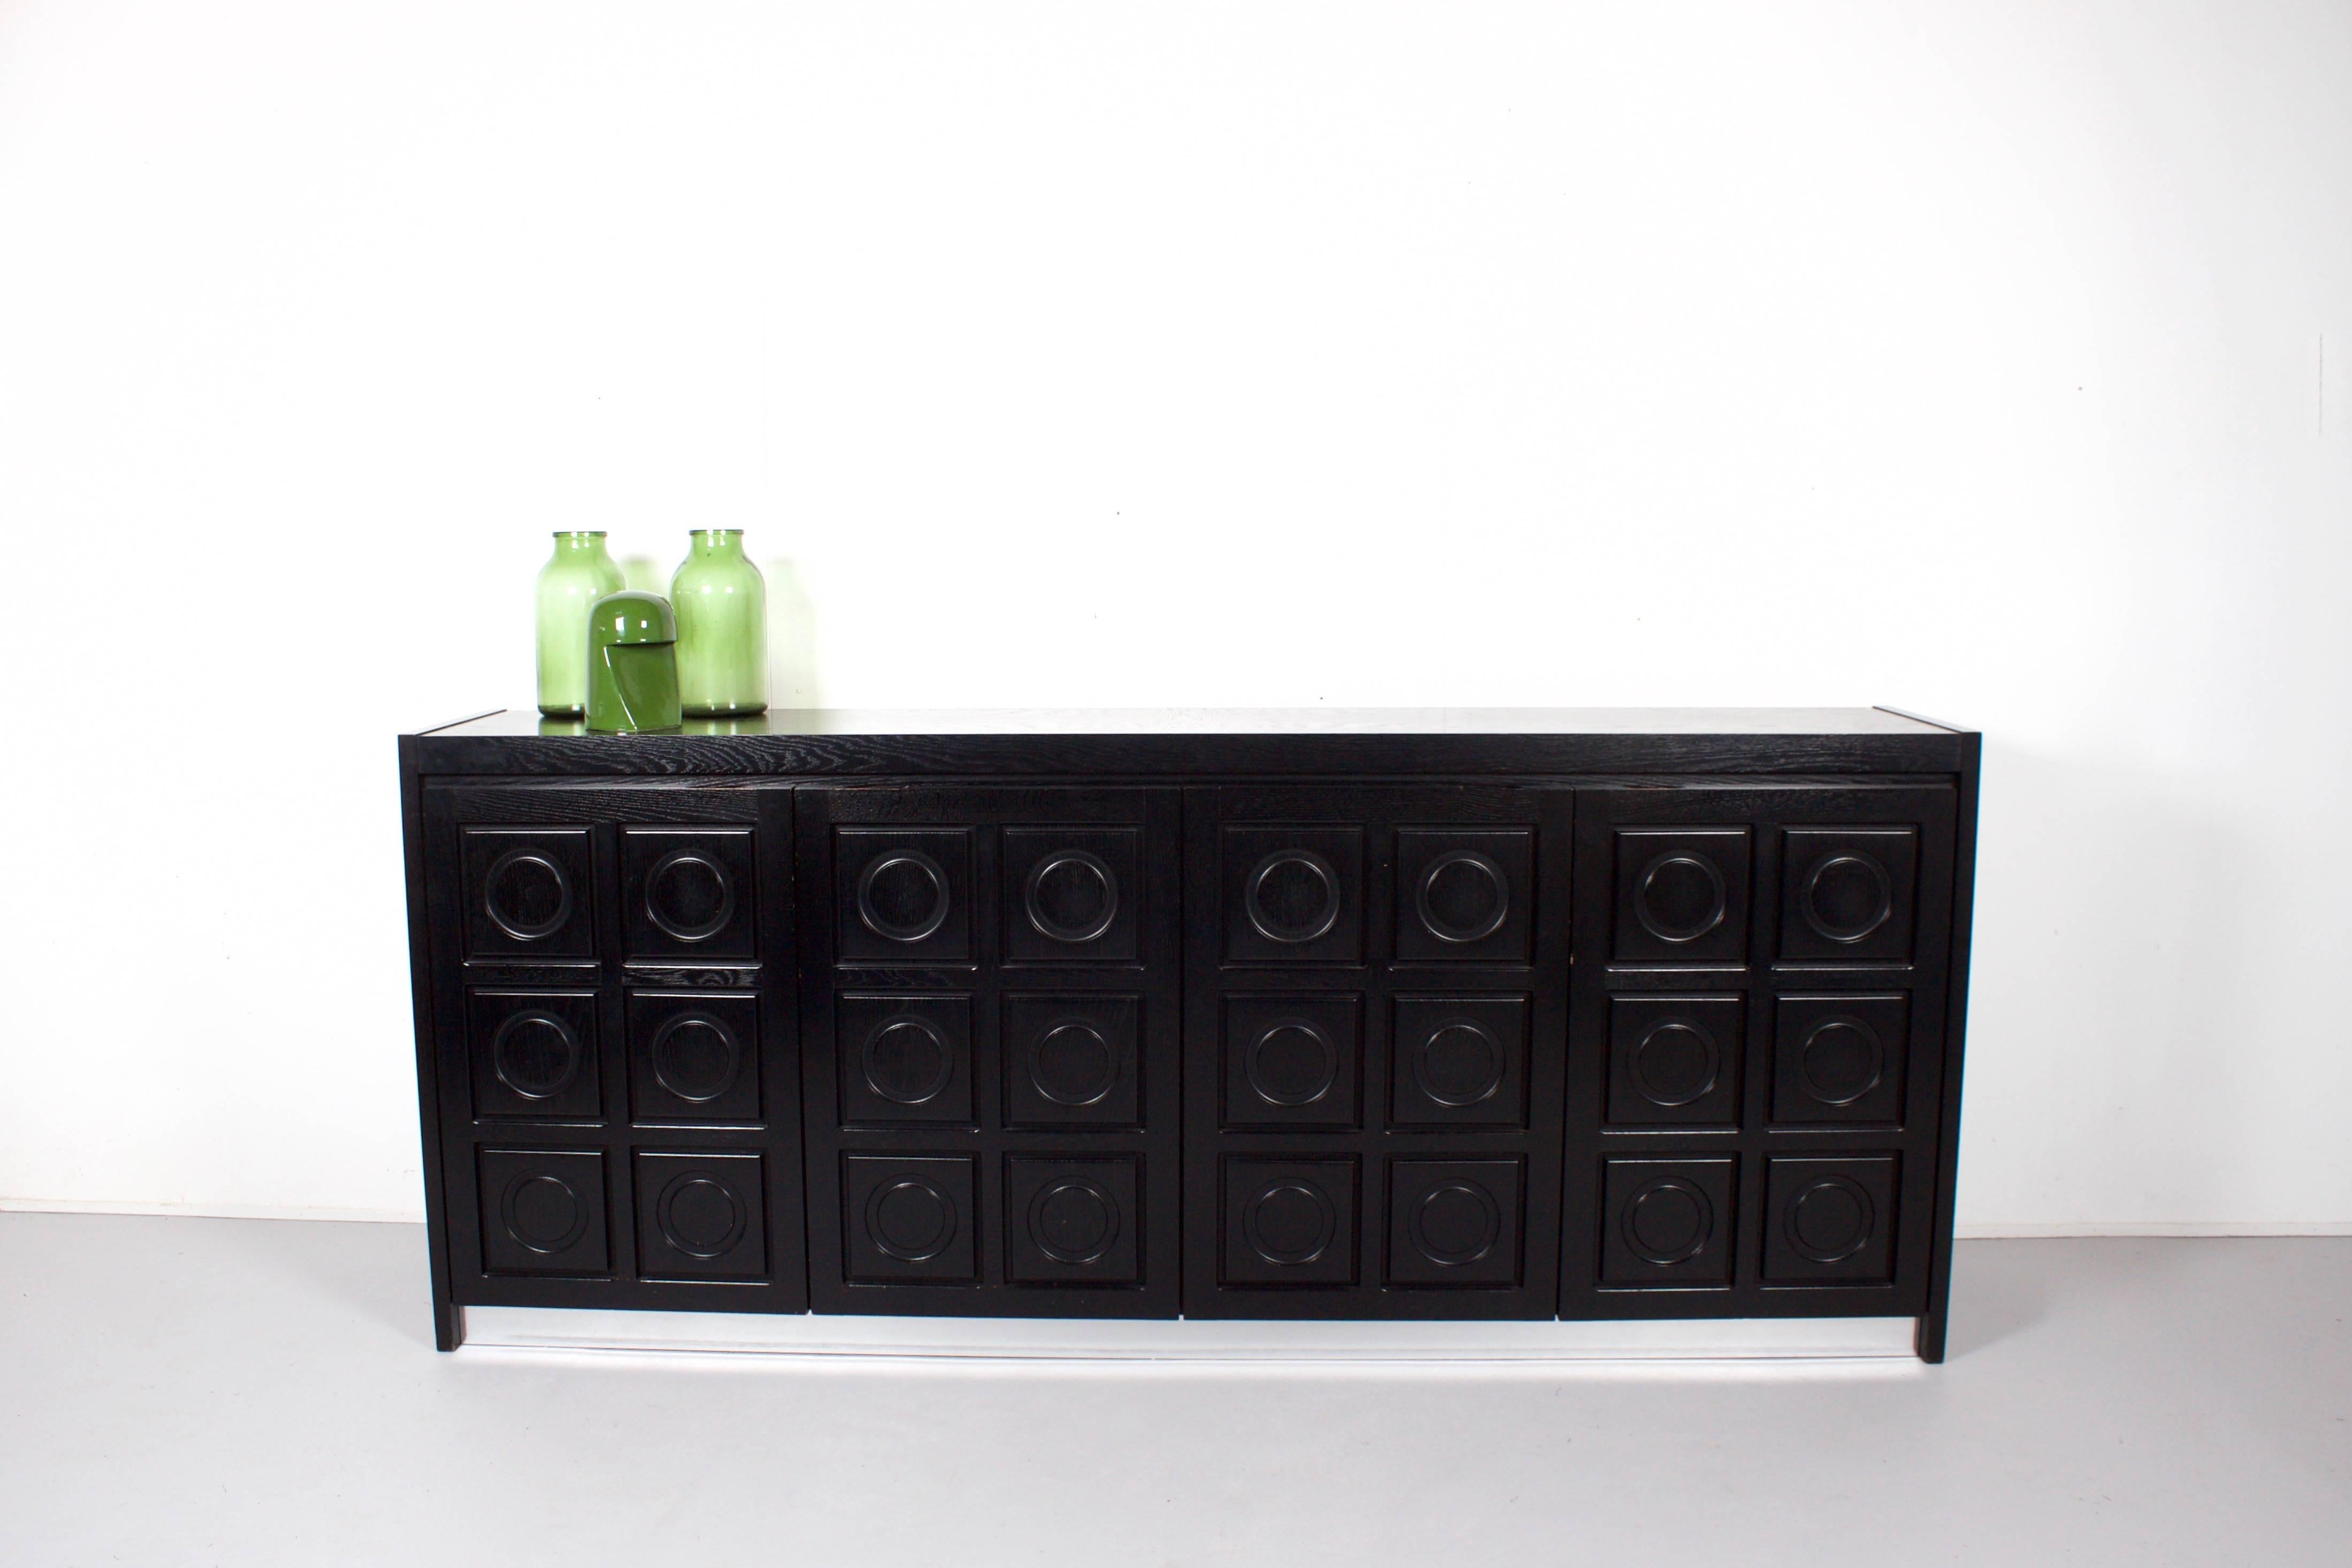 Impressive Belgium Brutalist credenza in very good condition

This sideboard has four doors made of massive black stained oak, each with a three-dimensional pattern of circles.

The sideboard is equipped with an aluminium strip on the base which